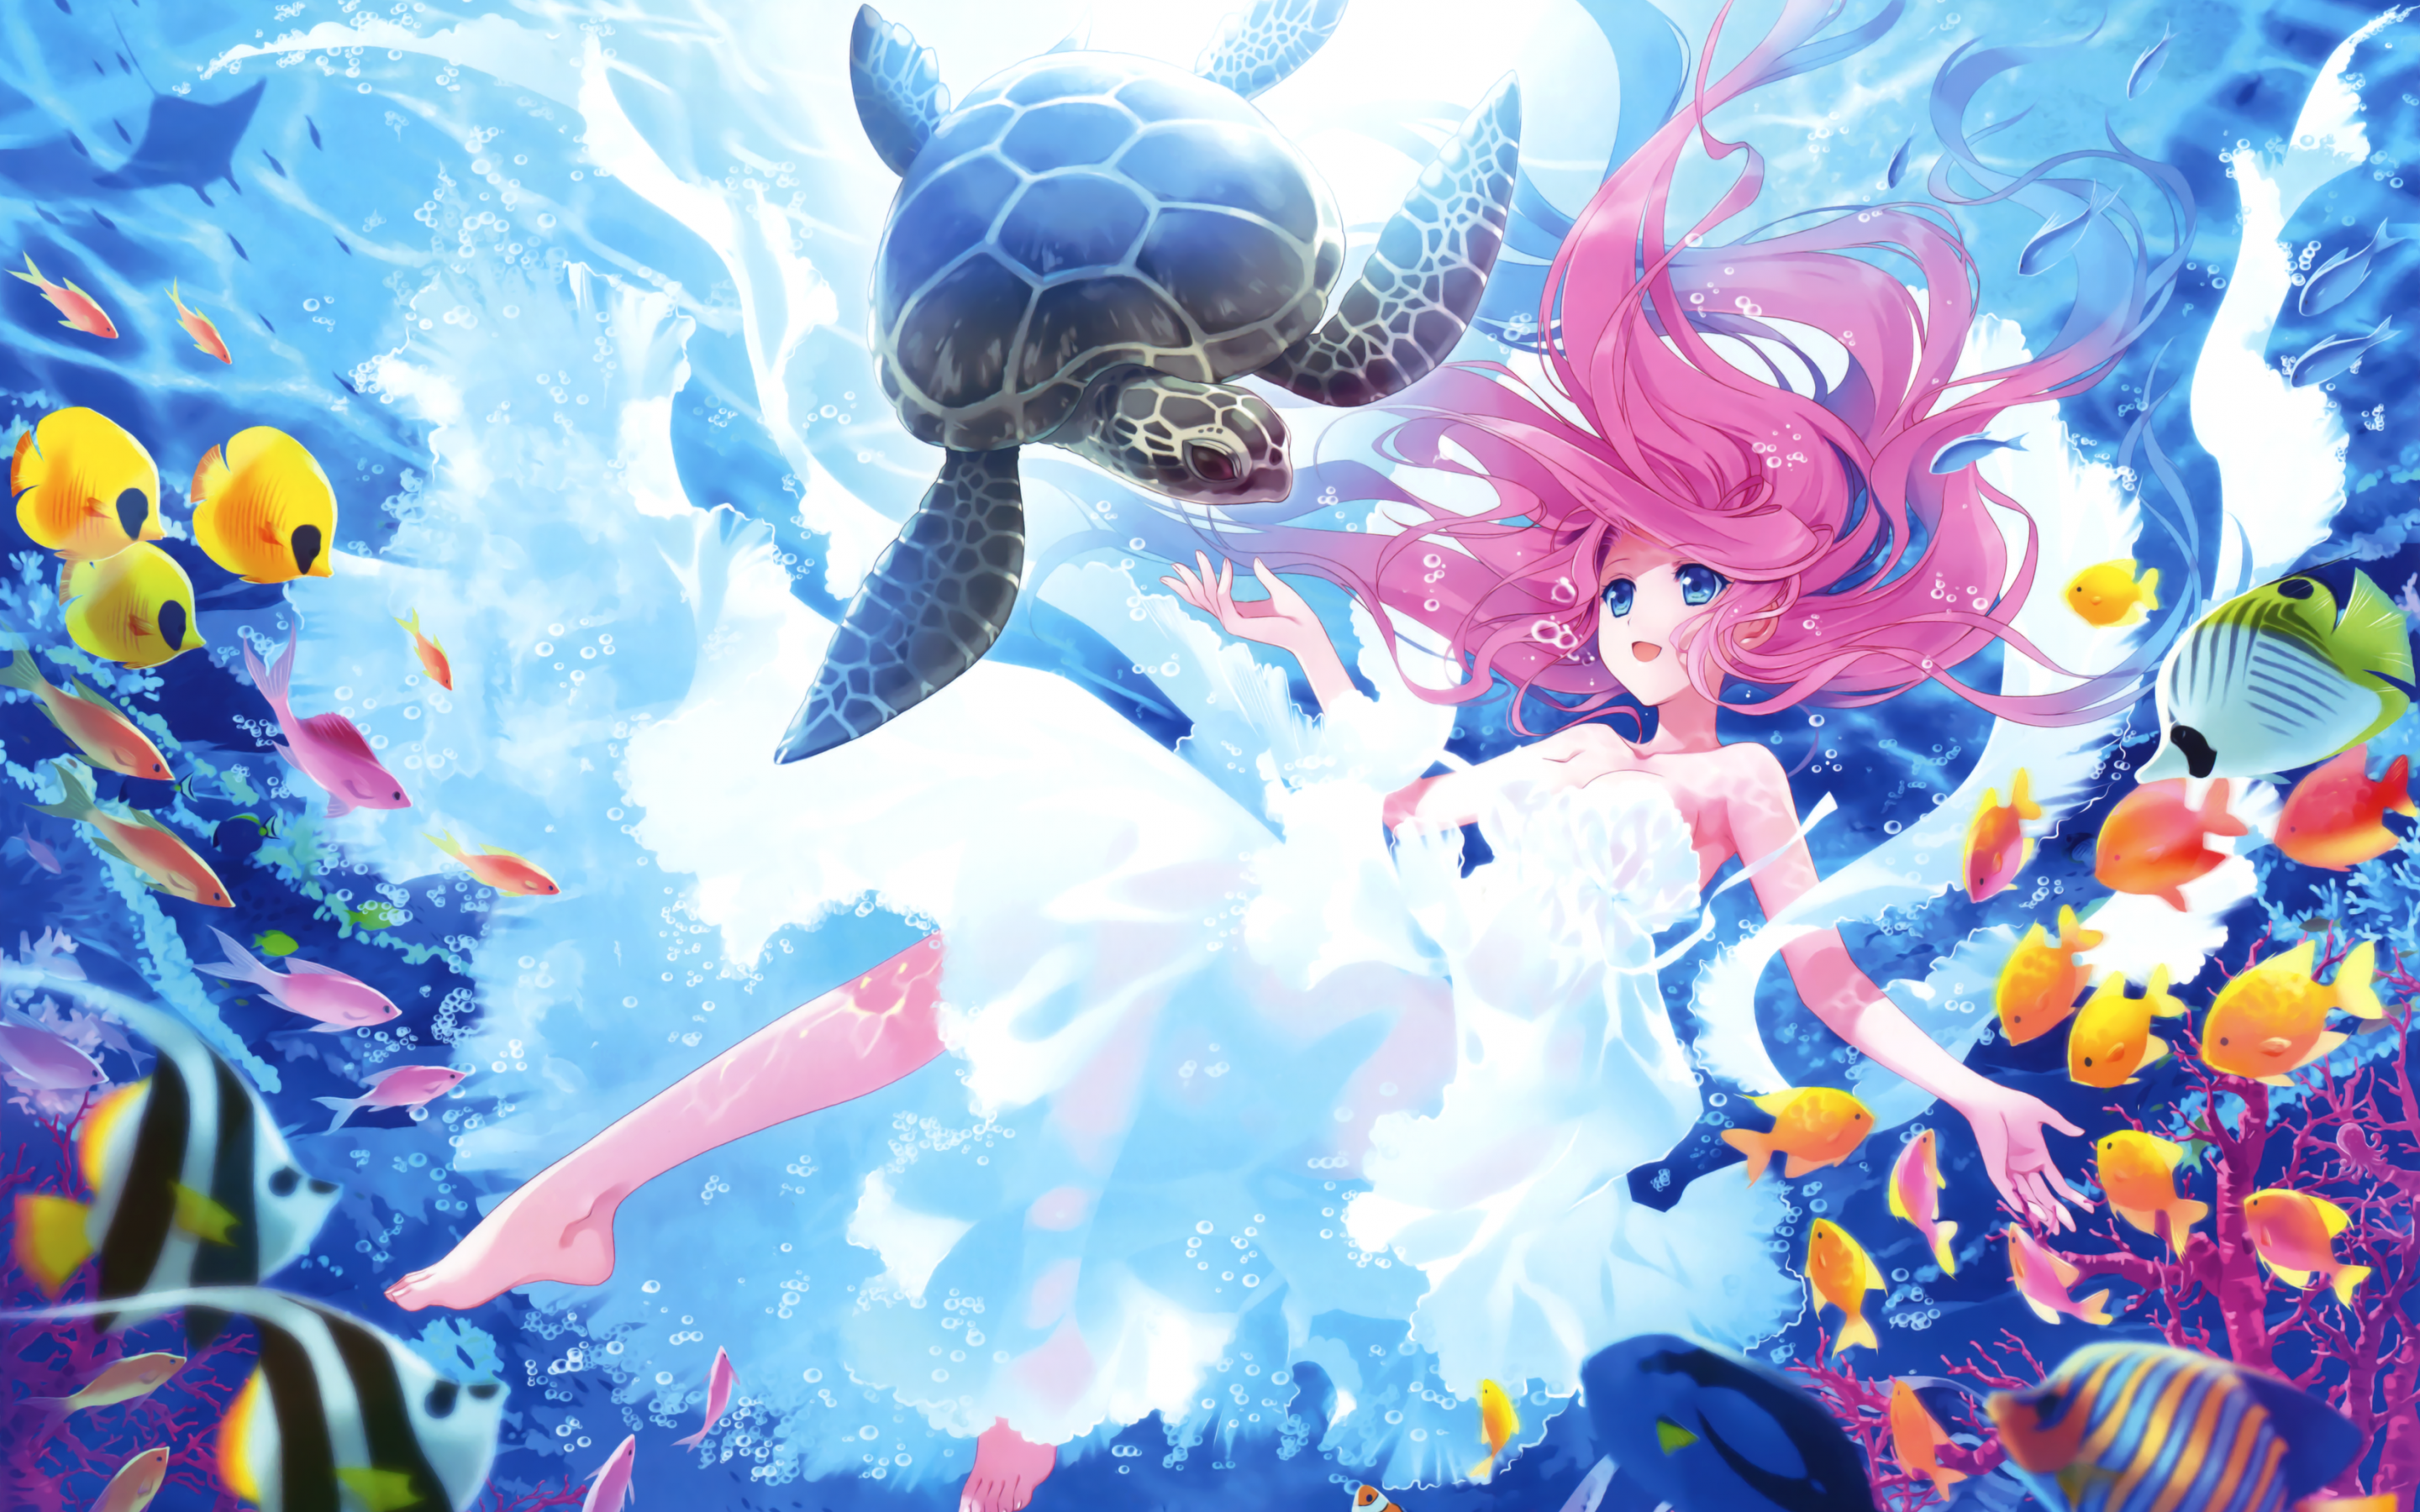 Wallpaper Kawaii, Mermaid, Turtle, Fishes, Underwater, HD, Anime / Most Popular,. Wallpaper for iPhone, Android, Mobile and Desktop